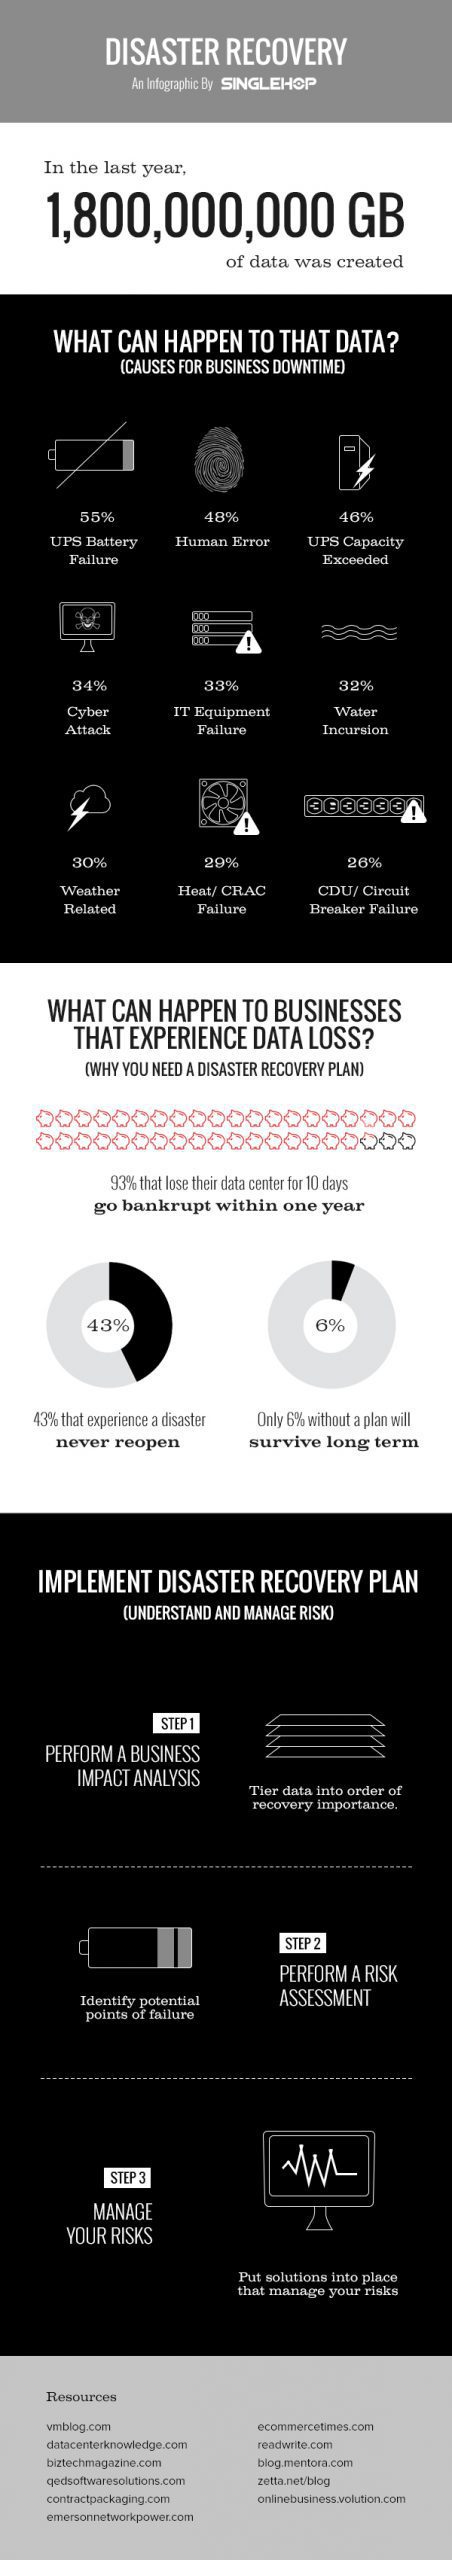 How Data Disasters Can Seriously Harm Your Company - Infographic